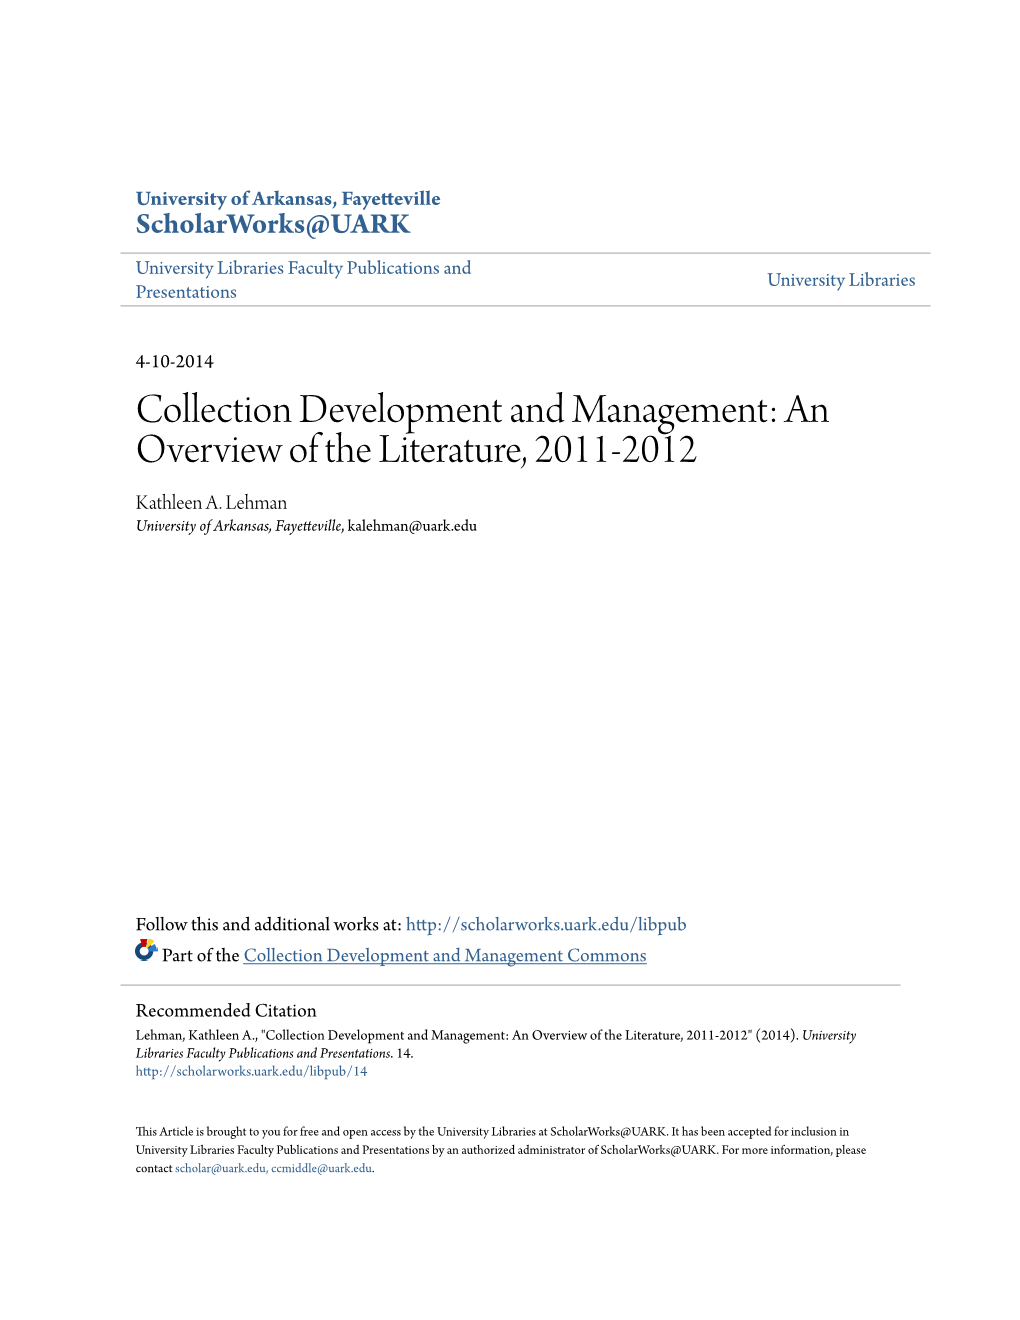 Collection Development and Management: an Overview of the Literature, 2011-2012 Kathleen A